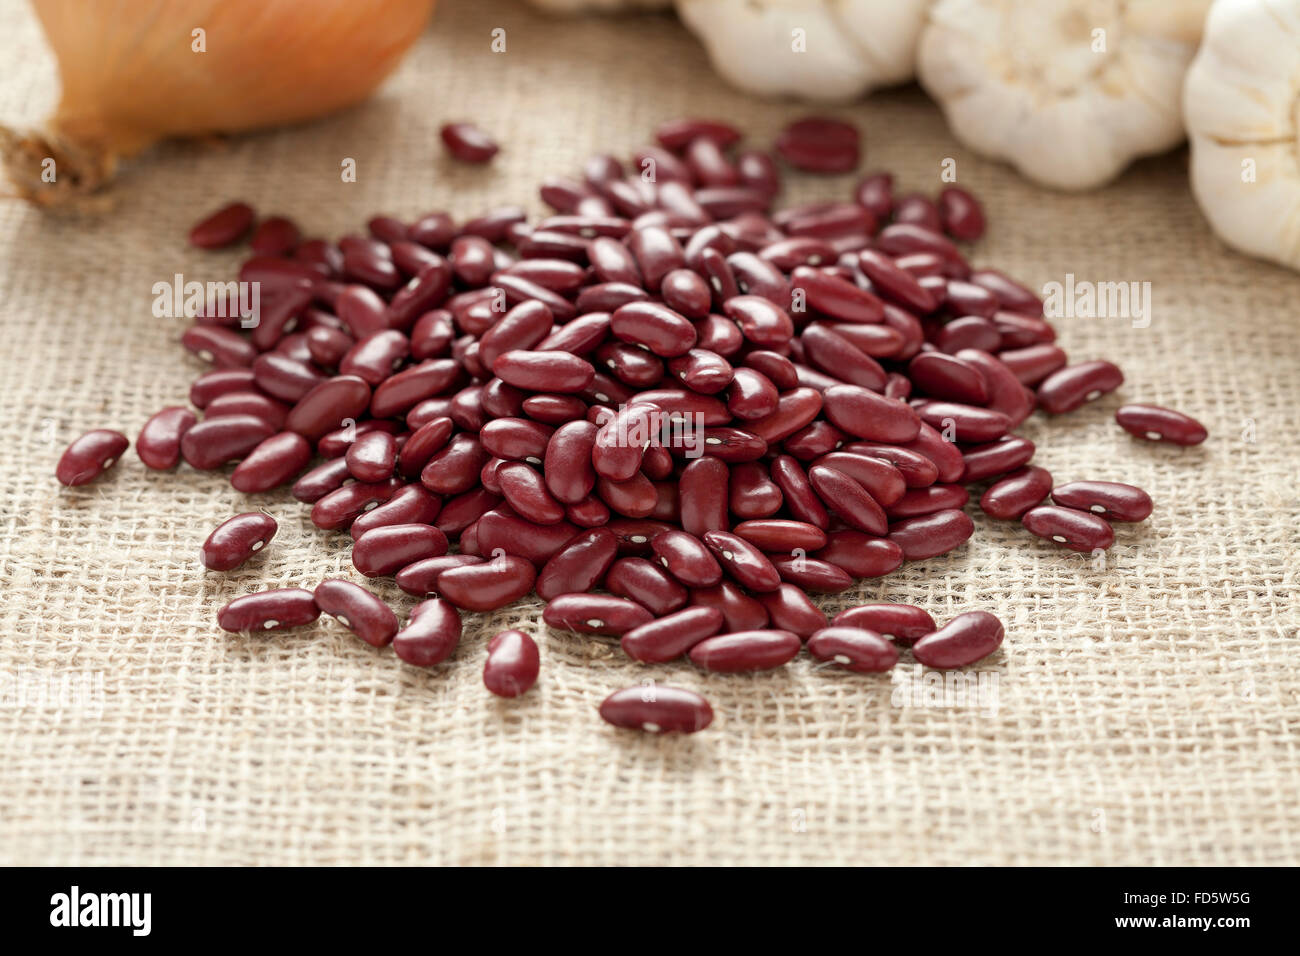 Dried Kidney beans on white background Stock Photo